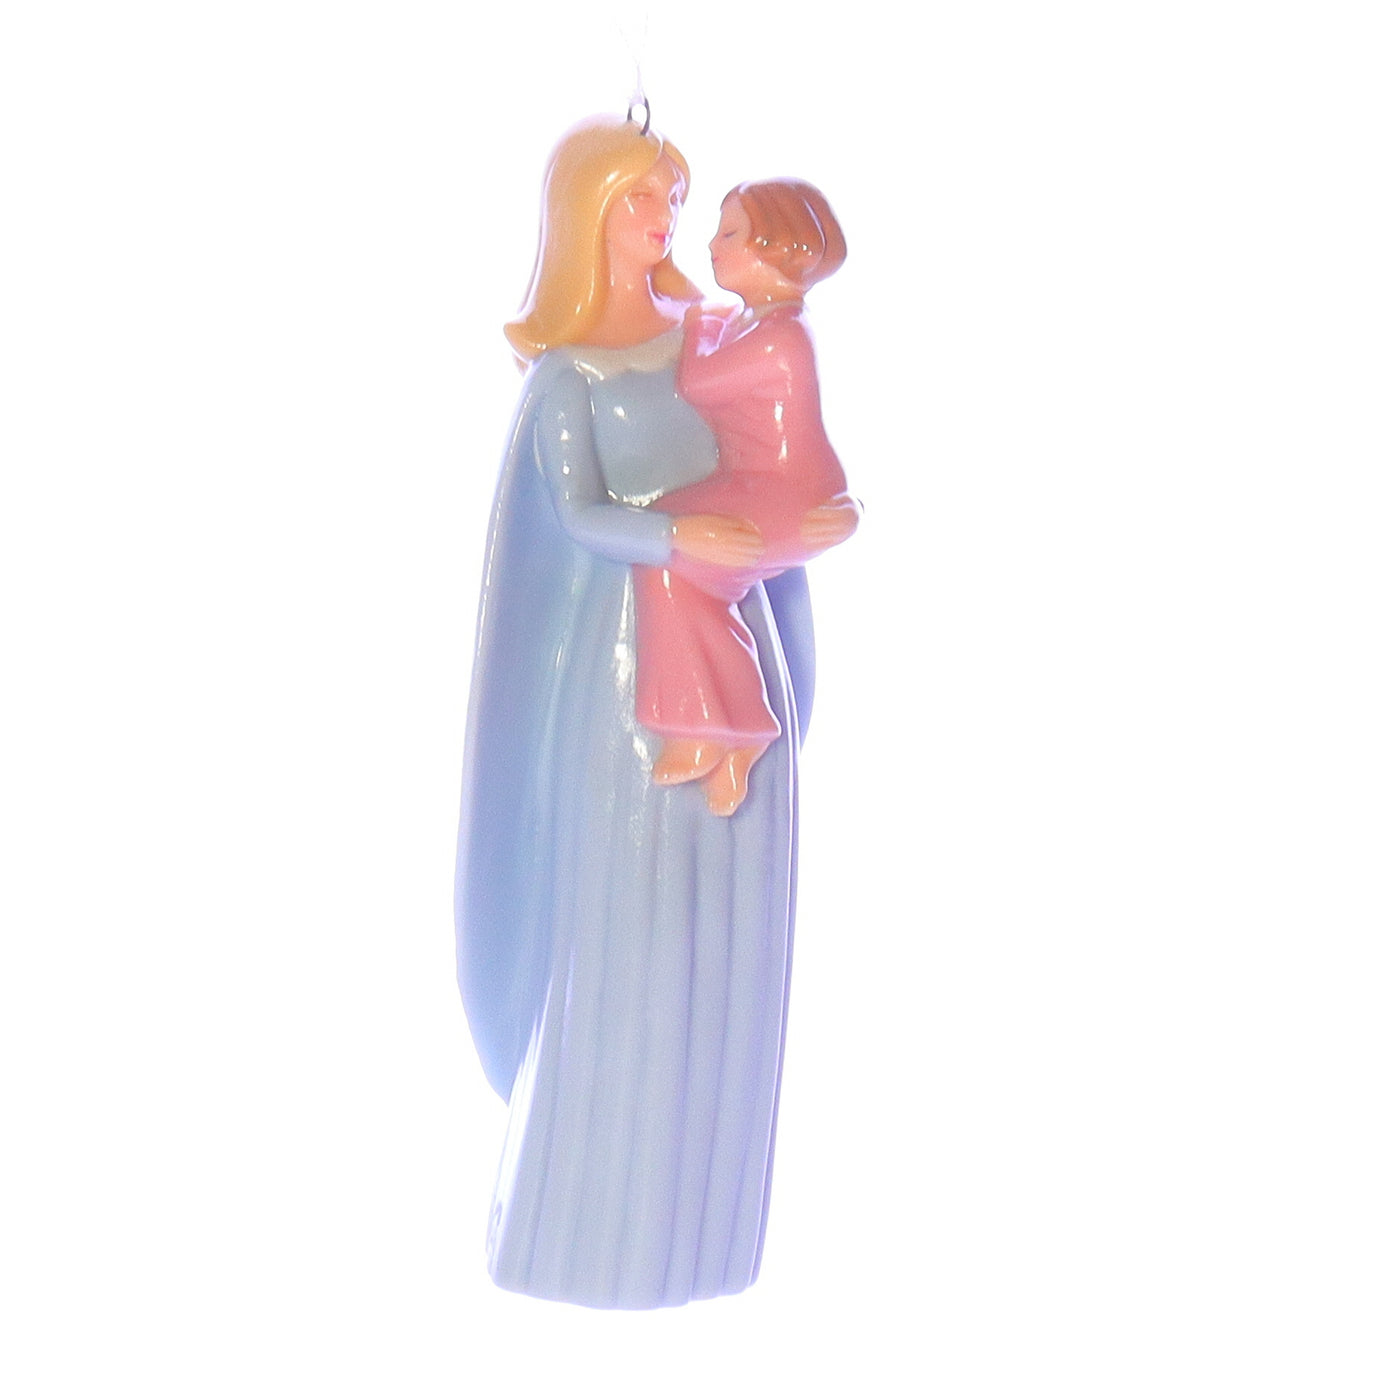 Hallmark_QXG4372_Angel_on_Earth_Christmas_Ornament_2005_Box Front Right View